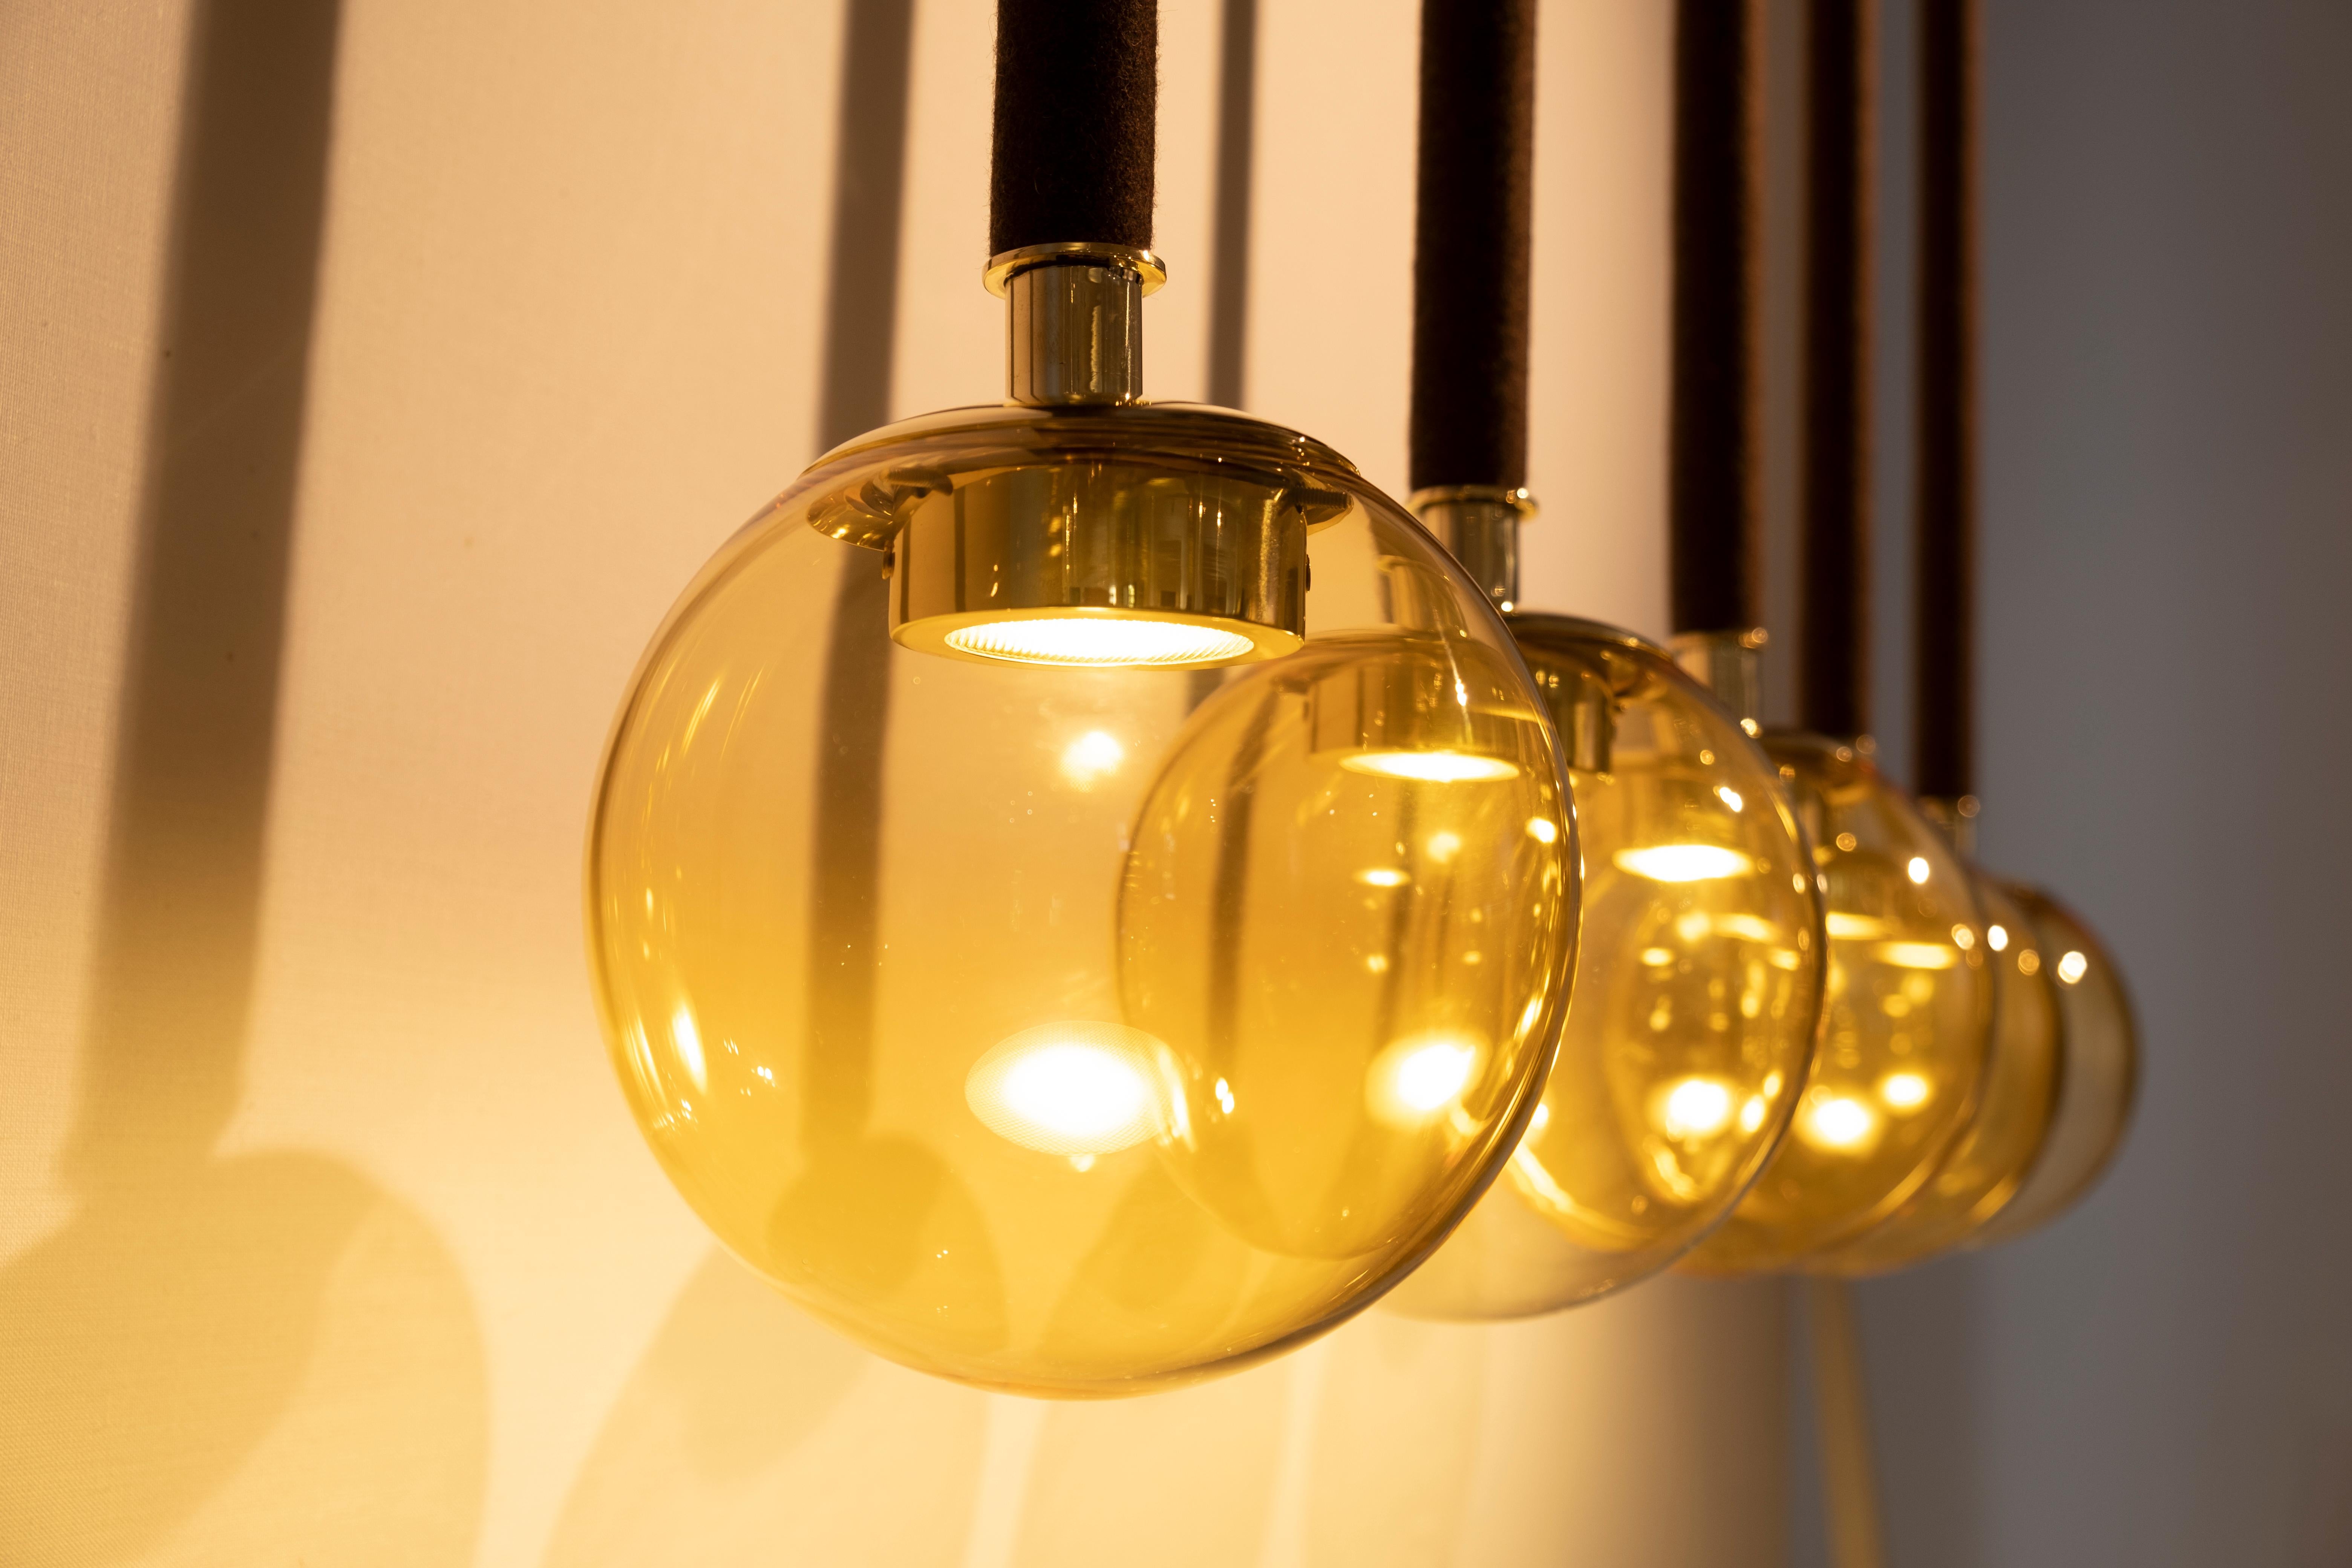 21st century Filippo Feroldi Suspension 5 lamps Murano glass and brass various colors.
Designed by Filippo Feroldi for Purho and Colleoni Arte, Magus 5 is a chandelier composed of five Murano blown glass spheres of 18 cm each — available in amber